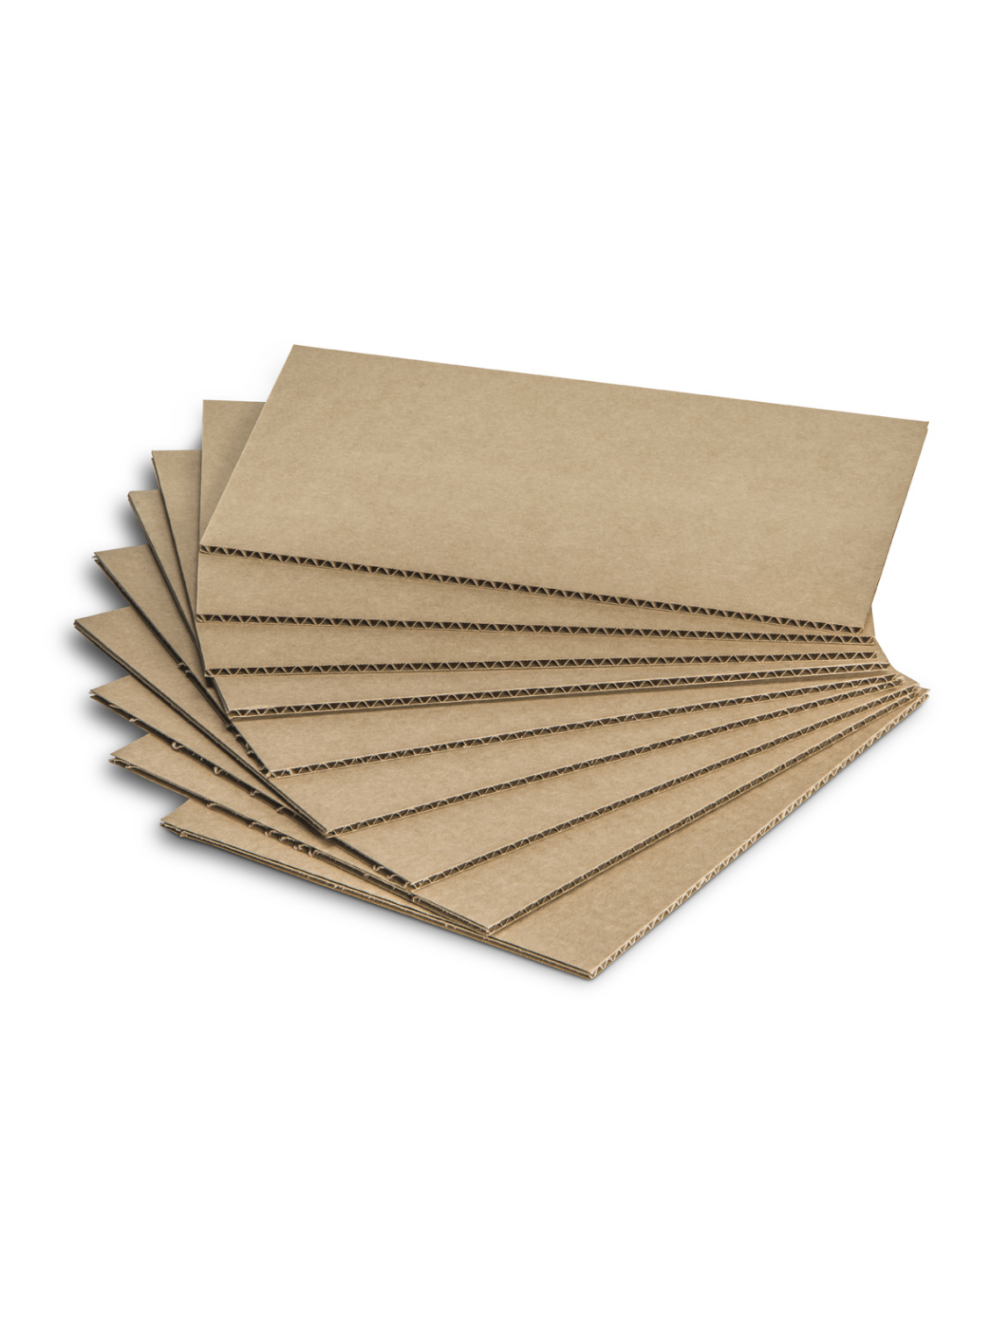 1190mm x 775mm Double and Single Wall Cardboard Sheets Pads Art Craft Board-... 